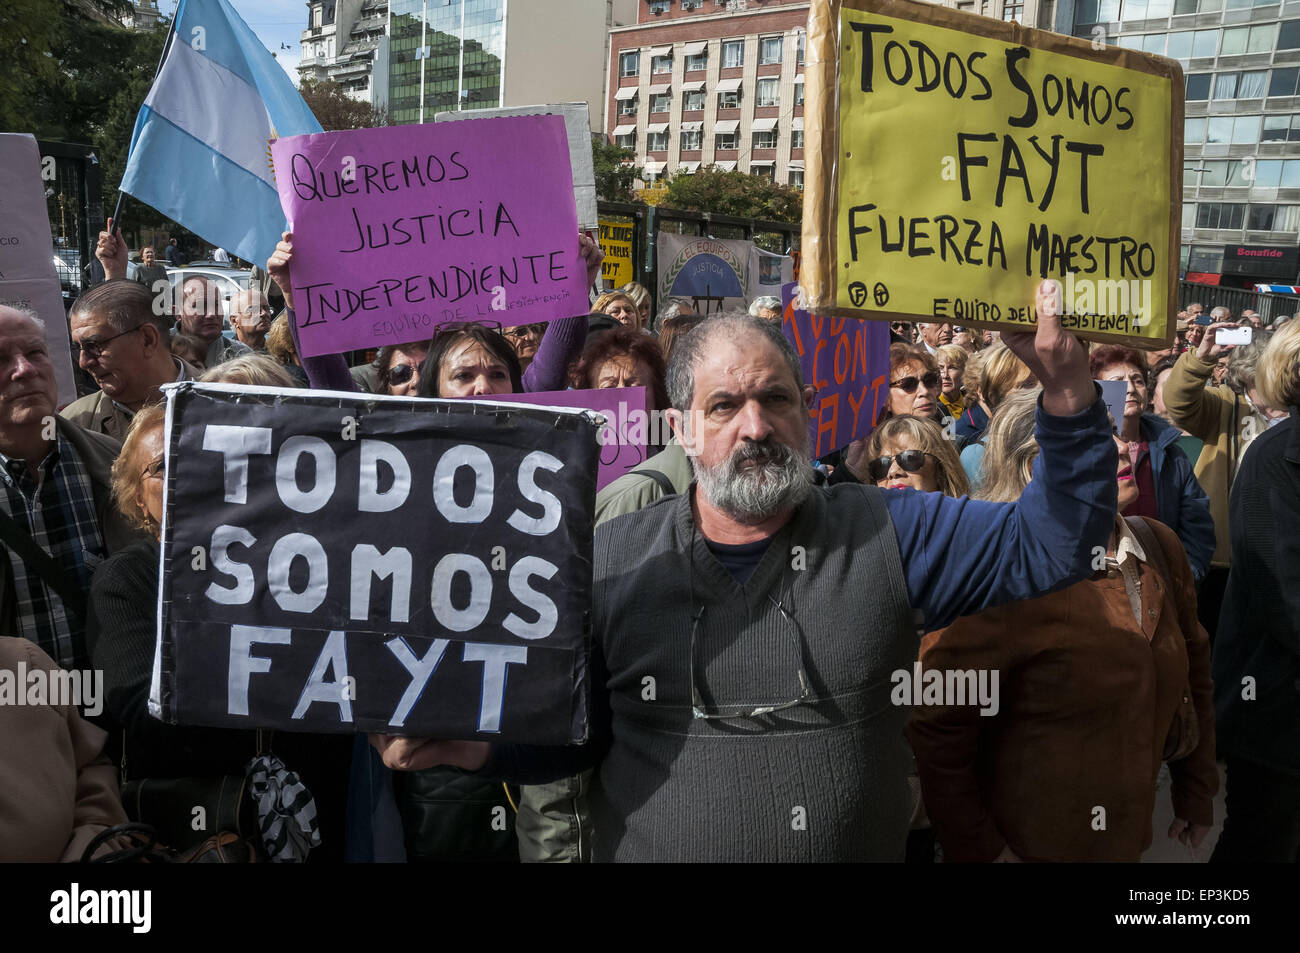 Buenos Aires, Buenos Aires, Argentina. 13th May, 2015. A demo is held in front of the Courthouse to support Supreme Court Judge Carlos Fayt (97), whose ability to continue performing his duties is being questioned by the government of President Cristina Fernandez Kirchner. Demonstrators also carried signs calling for the impeachment of the President and criticizing Chief of Cabinet Anibal Fernandez, one of the most visible critics of Judge Fayt from inside the government's ranks. © Patricio Murphy/ZUMA Wire/Alamy Live News Stock Photo